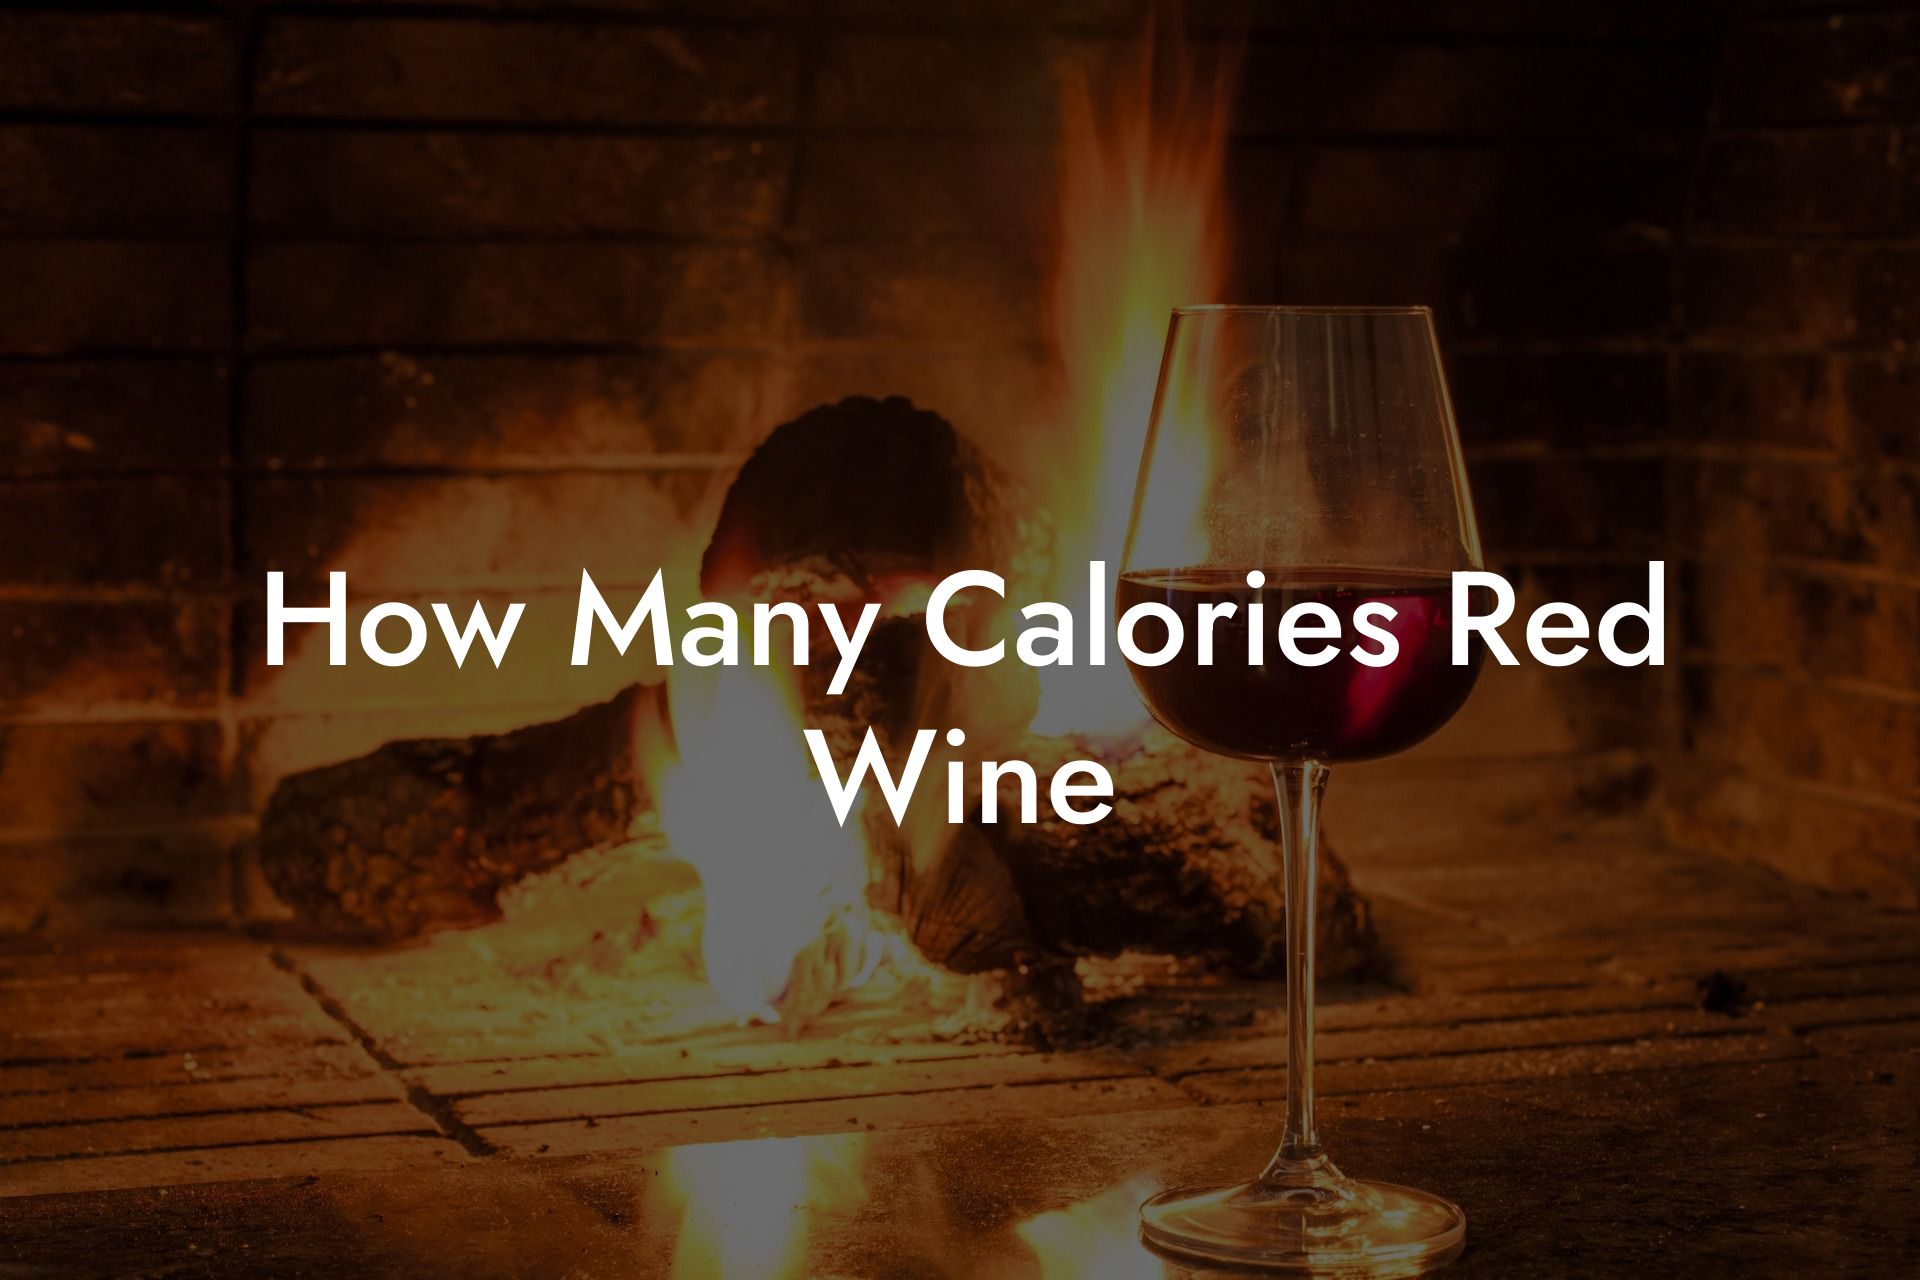 How Many Calories Red Wine